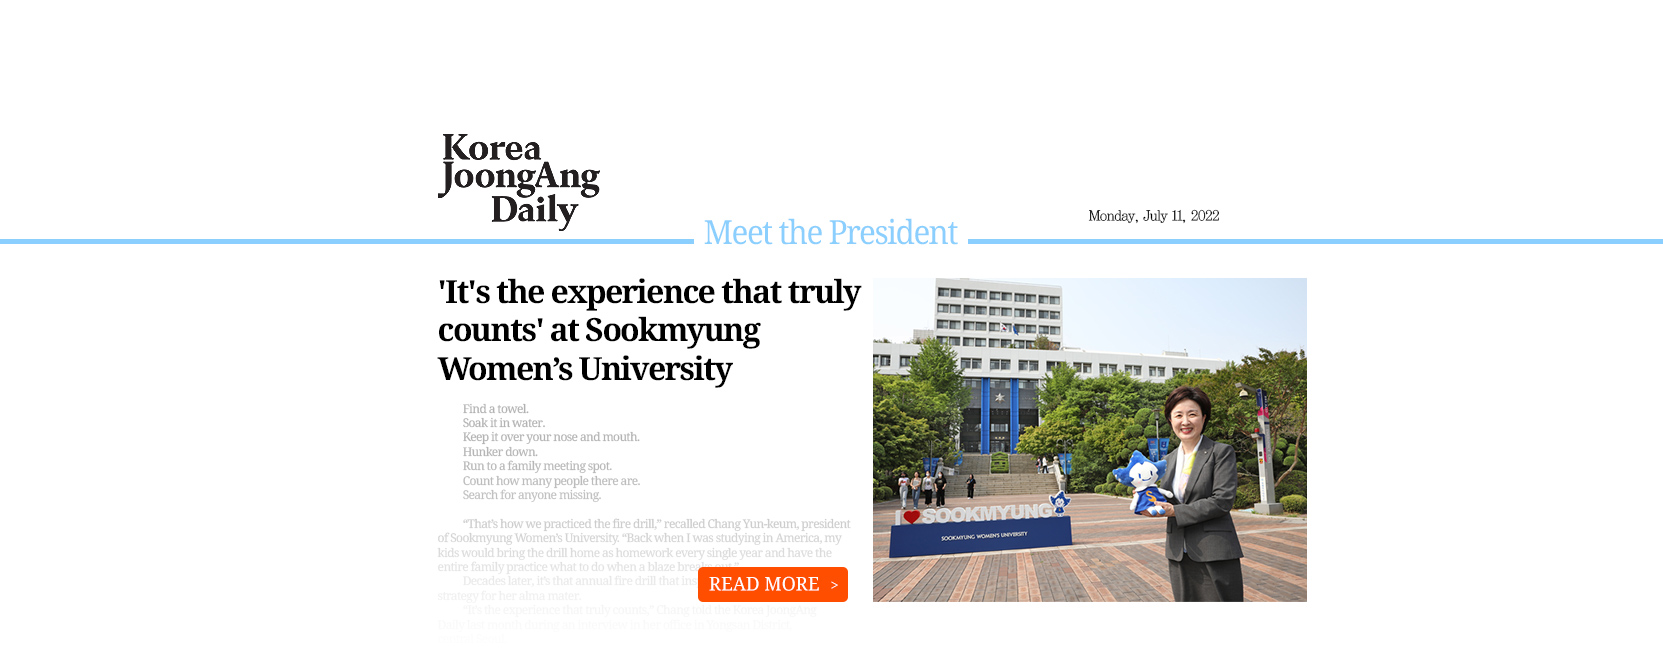 [Meet the President] 'It's the experience that truly counts' at Sookmyung Women’s University 이미지